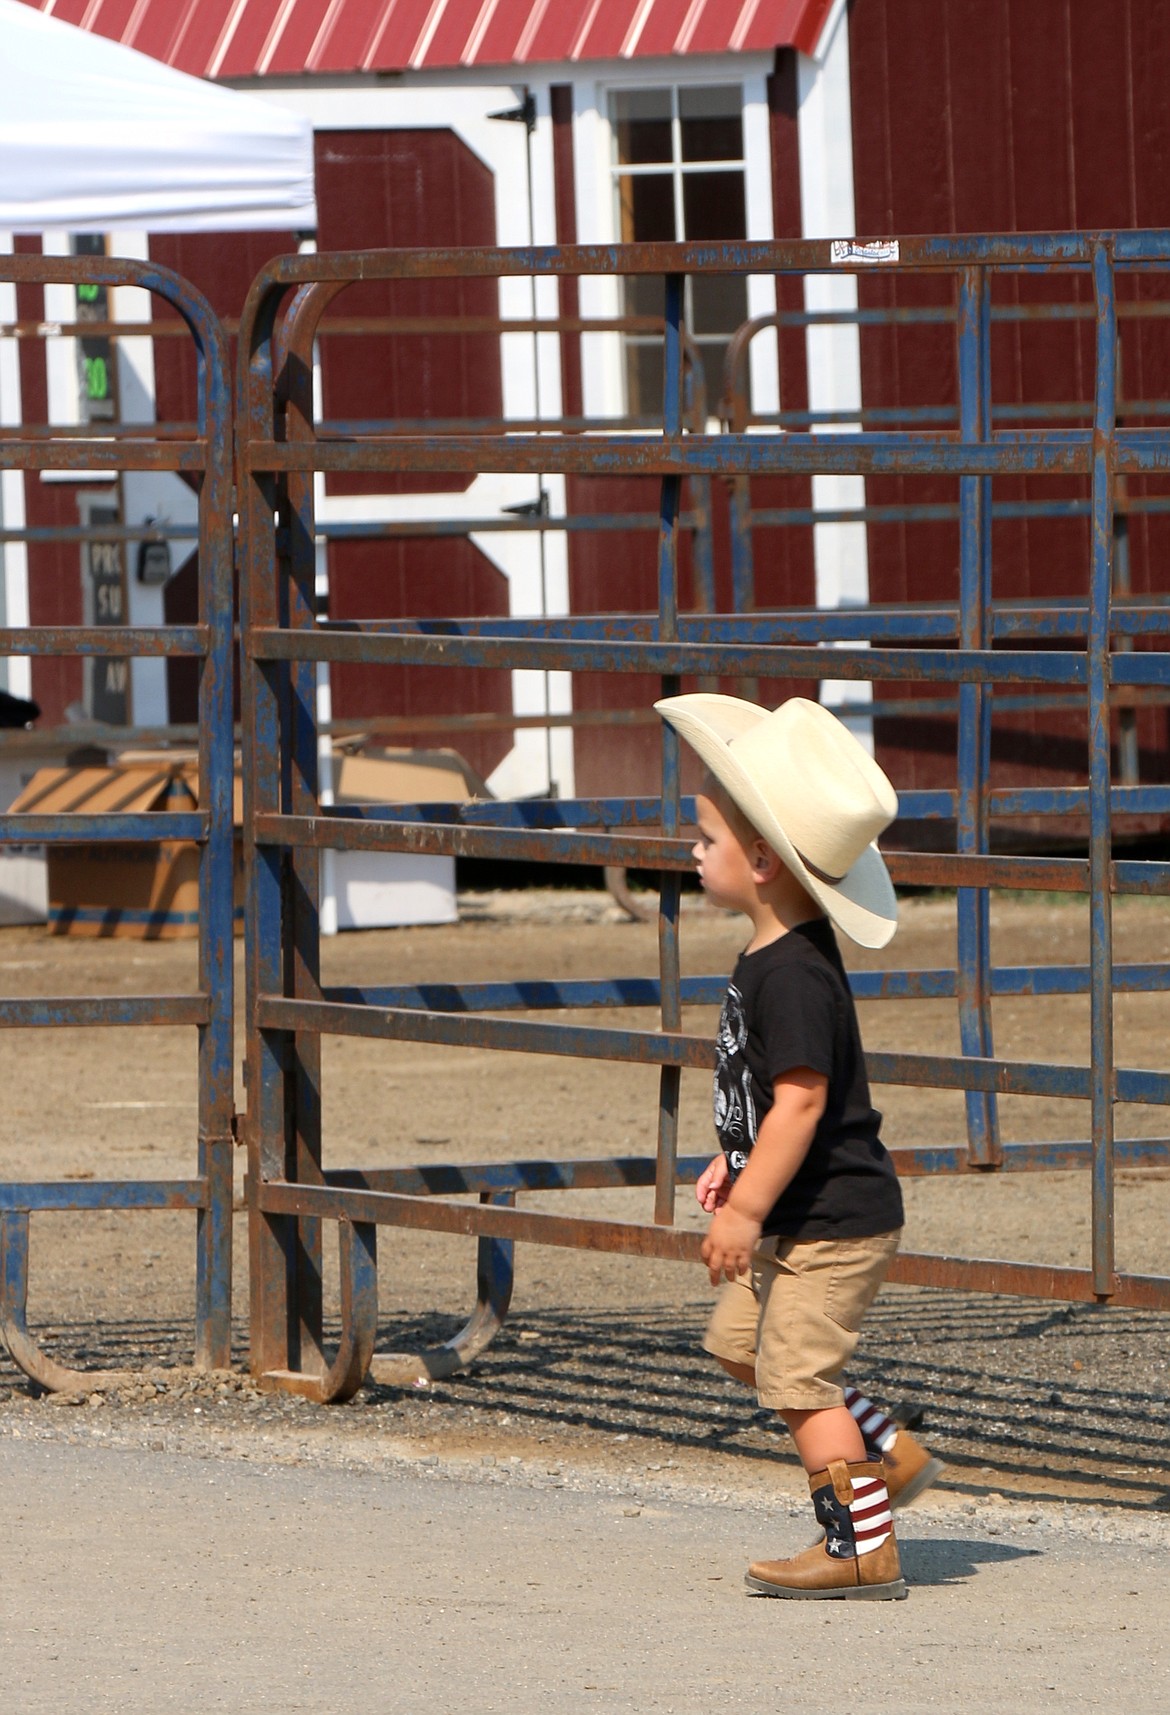 A young cowboy walks through the Bonner County Fairgrounds on Saturday.